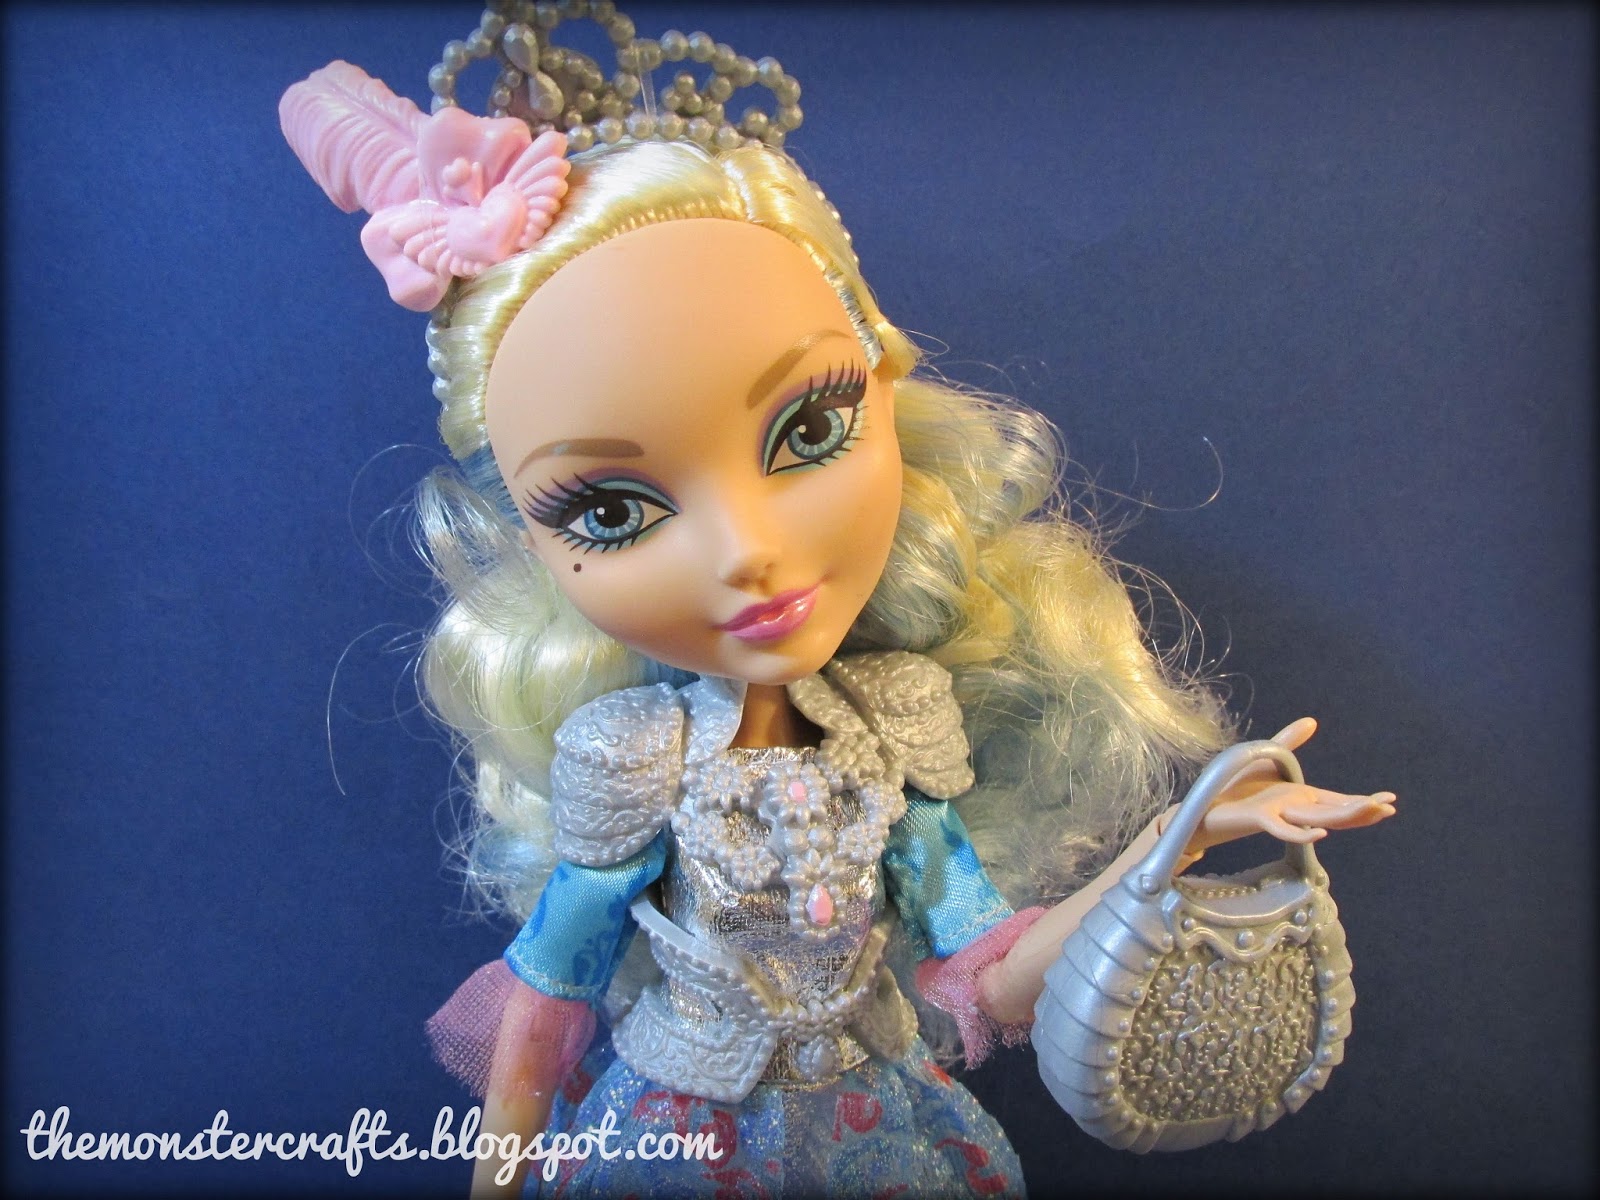 Doll Review: Signature Darling Charming